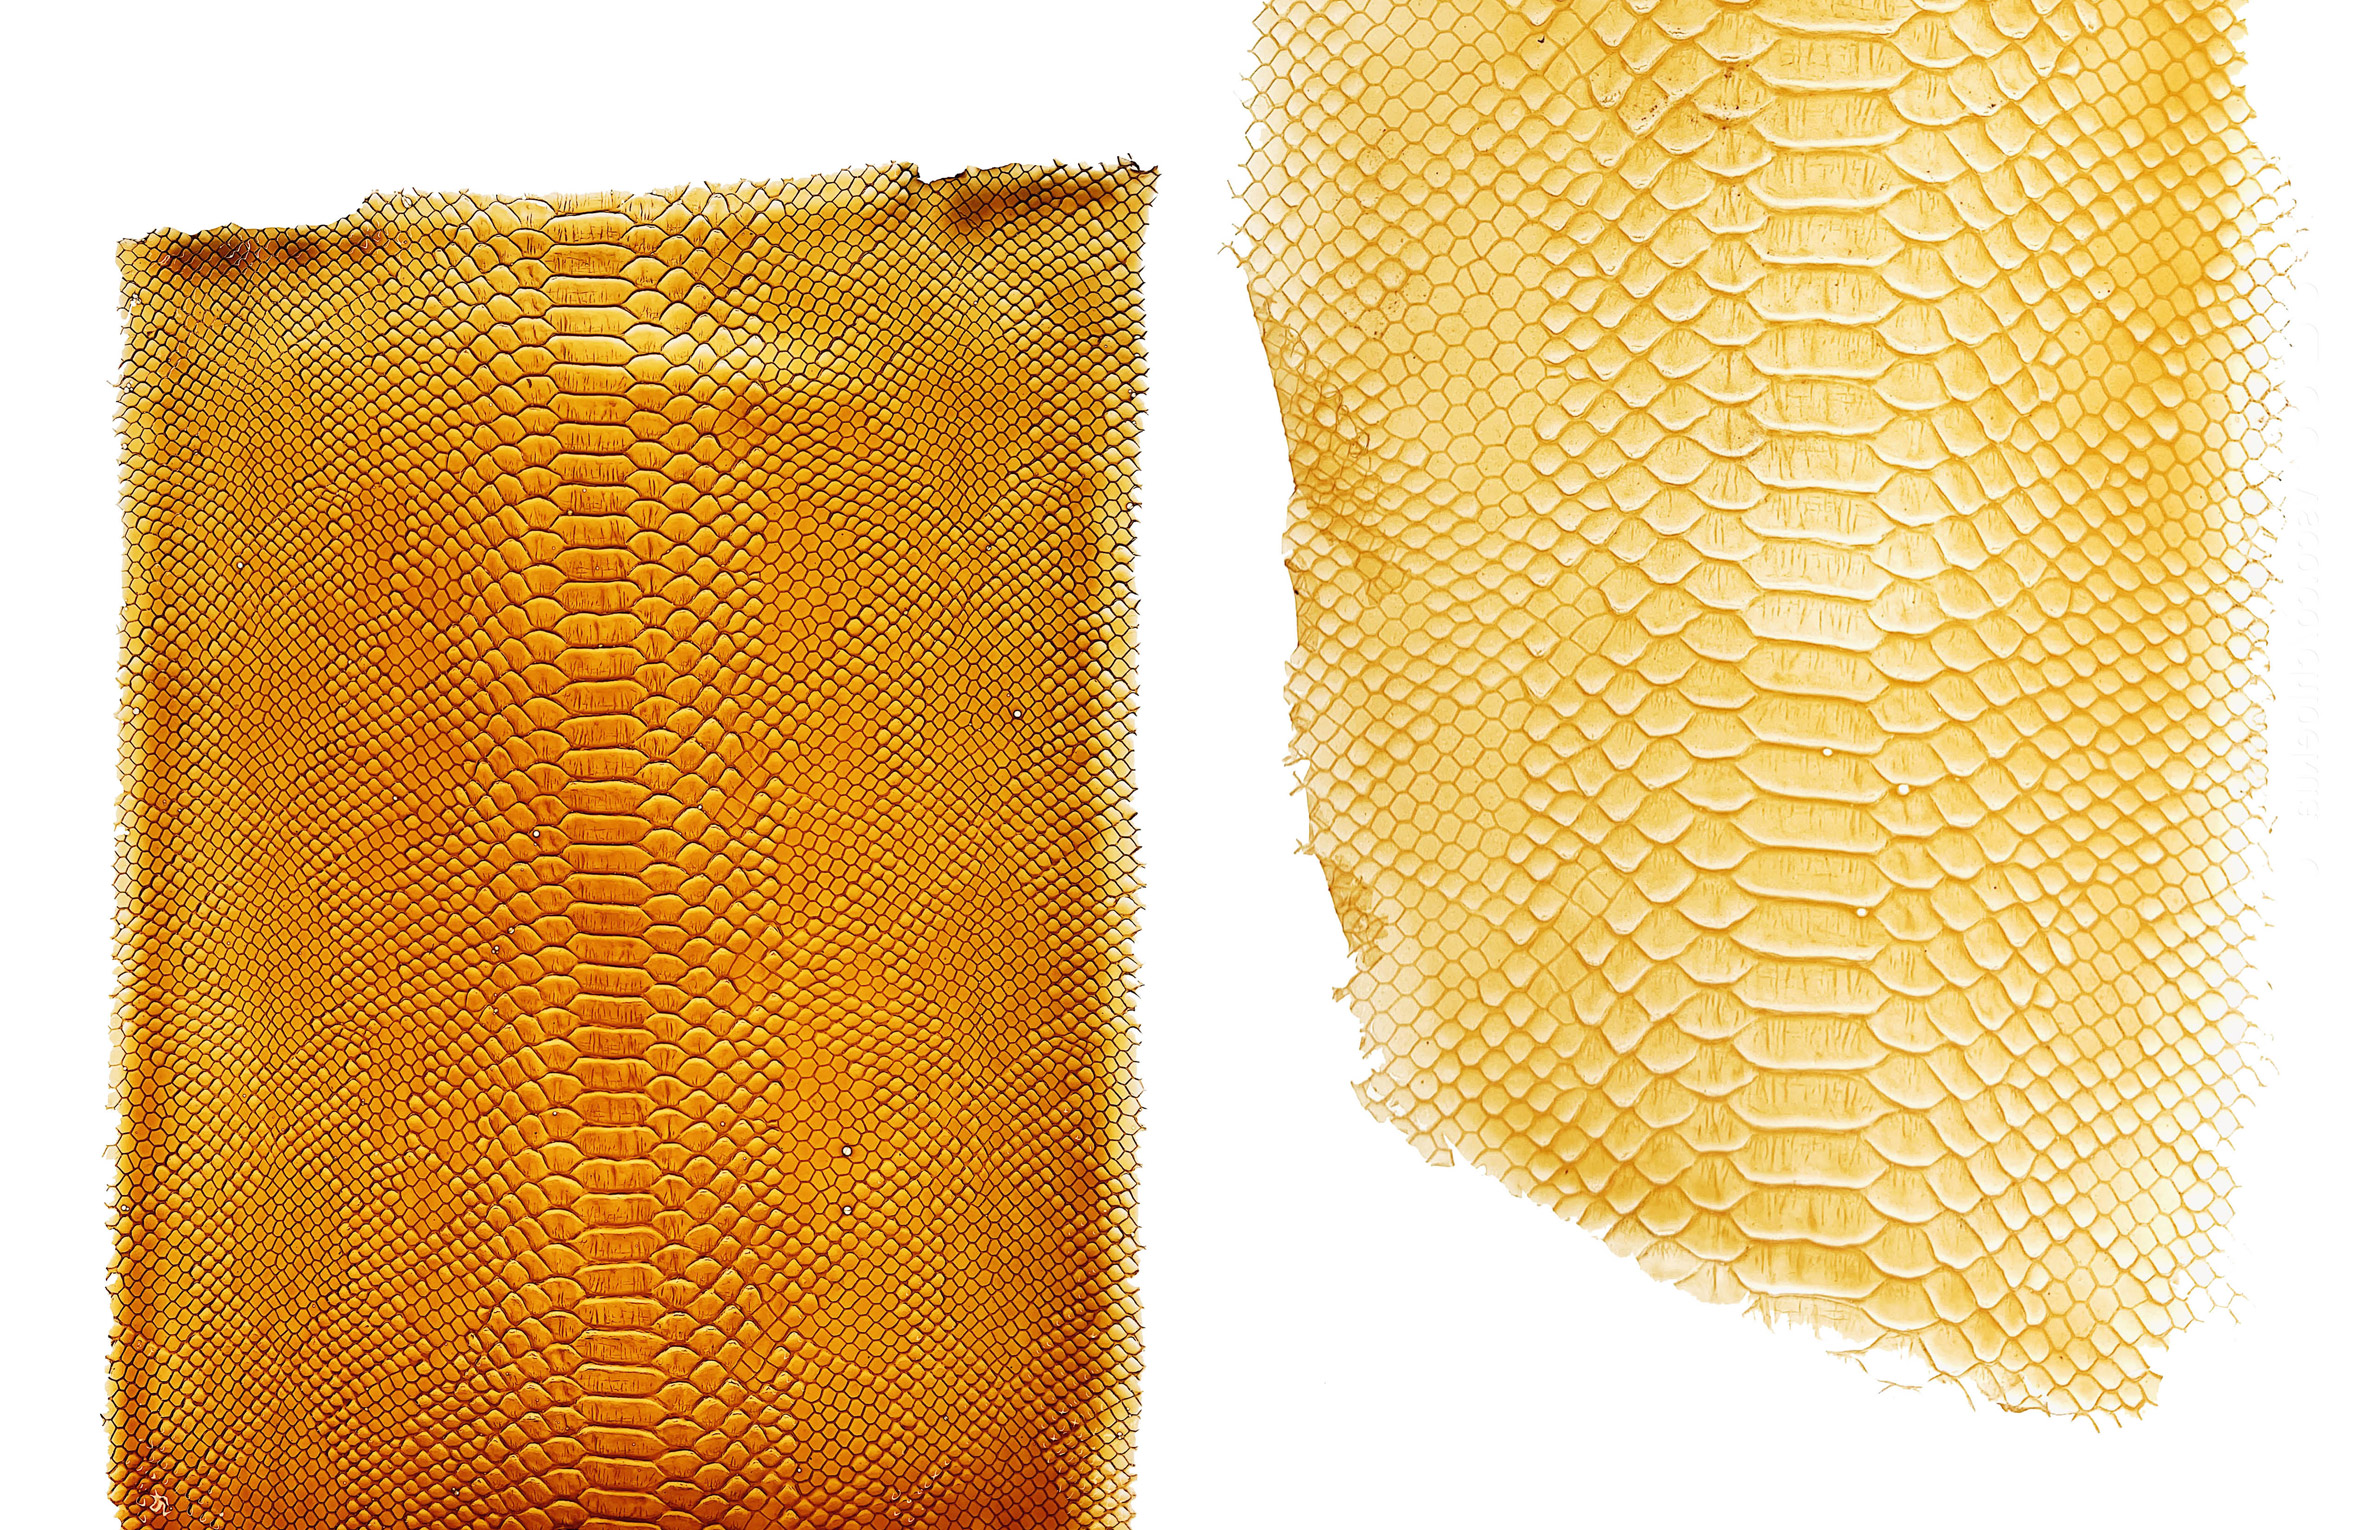 Tômtex is a leather alternative made from waste seafood shells and coffee